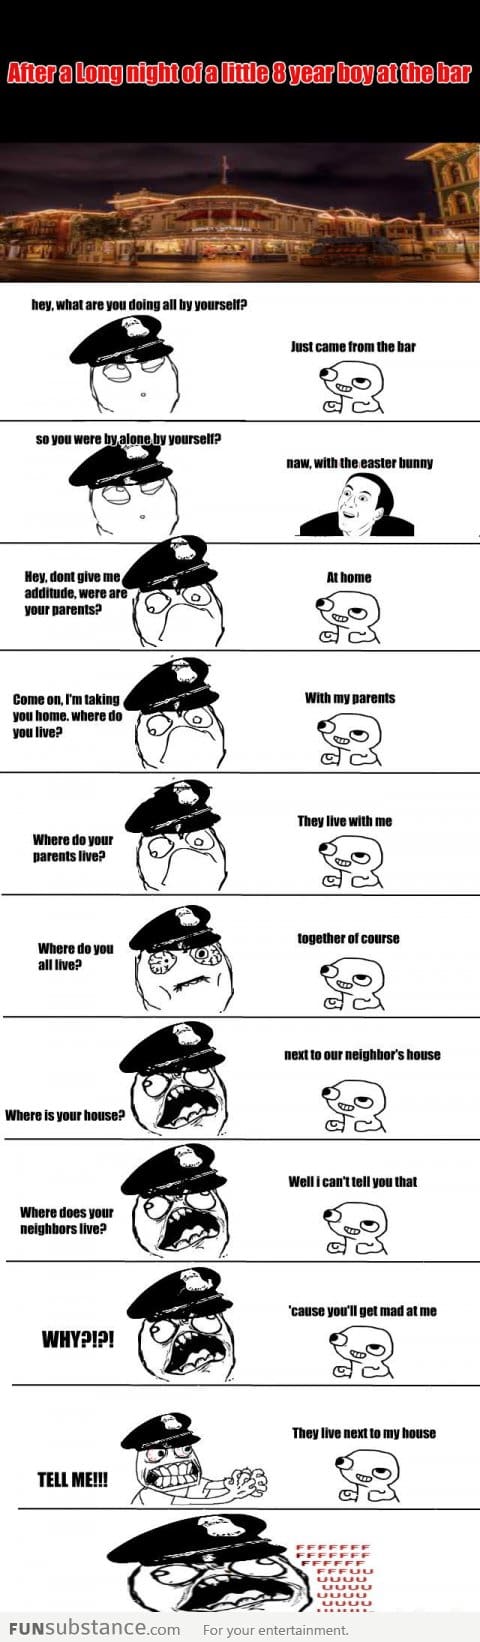 Trolling the cop